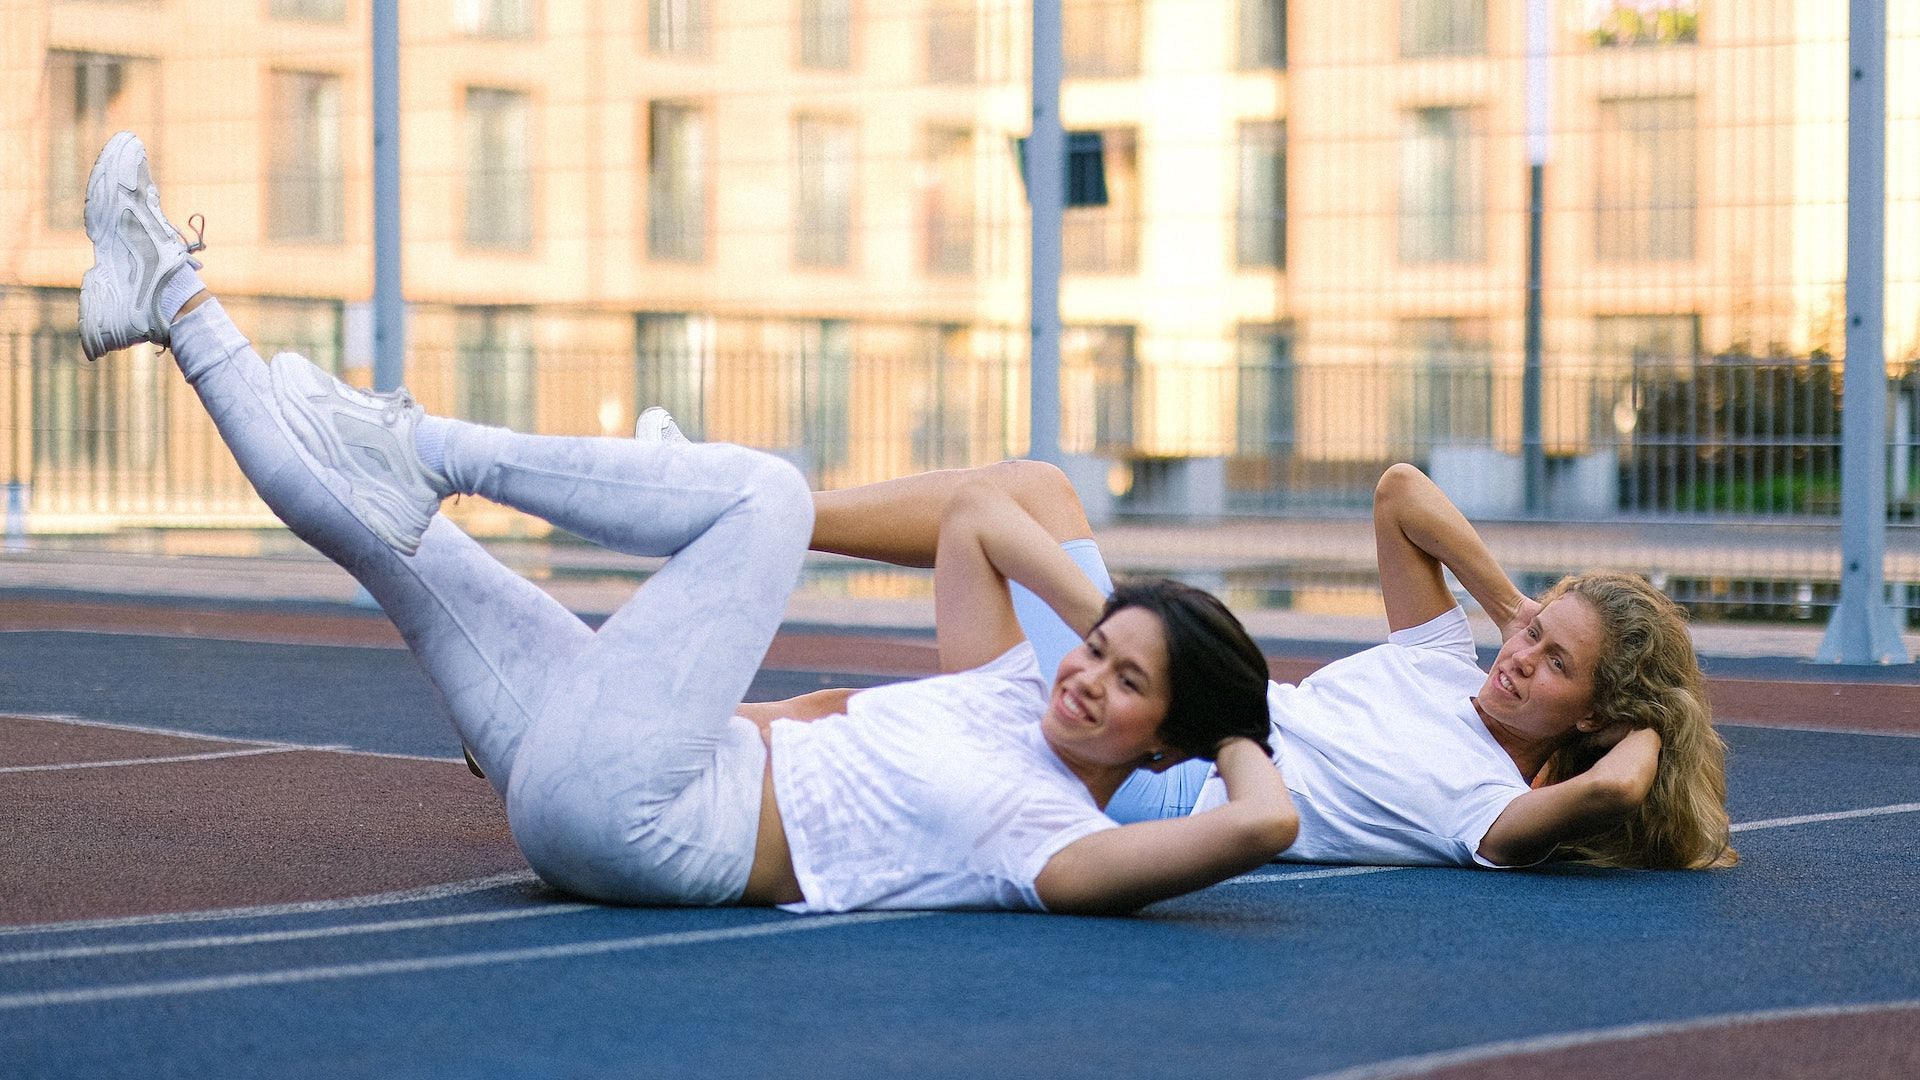 The best exercises for your abdominals. Image via Pexels/Anna Shvets